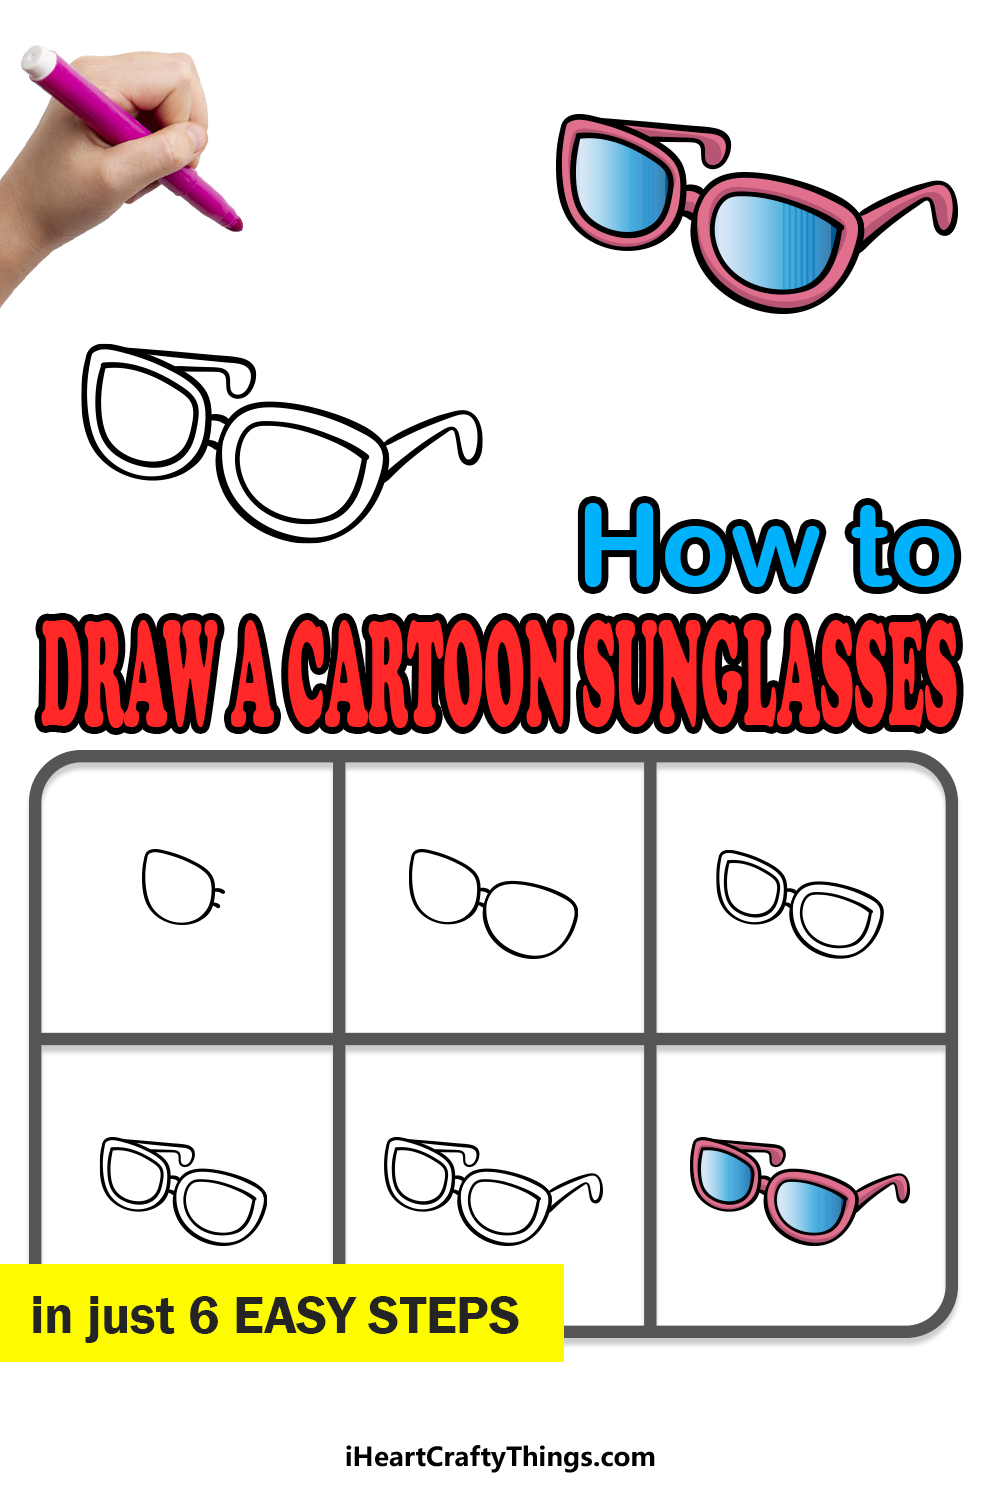 how to draw cartoon sunglasses in 6 easy steps